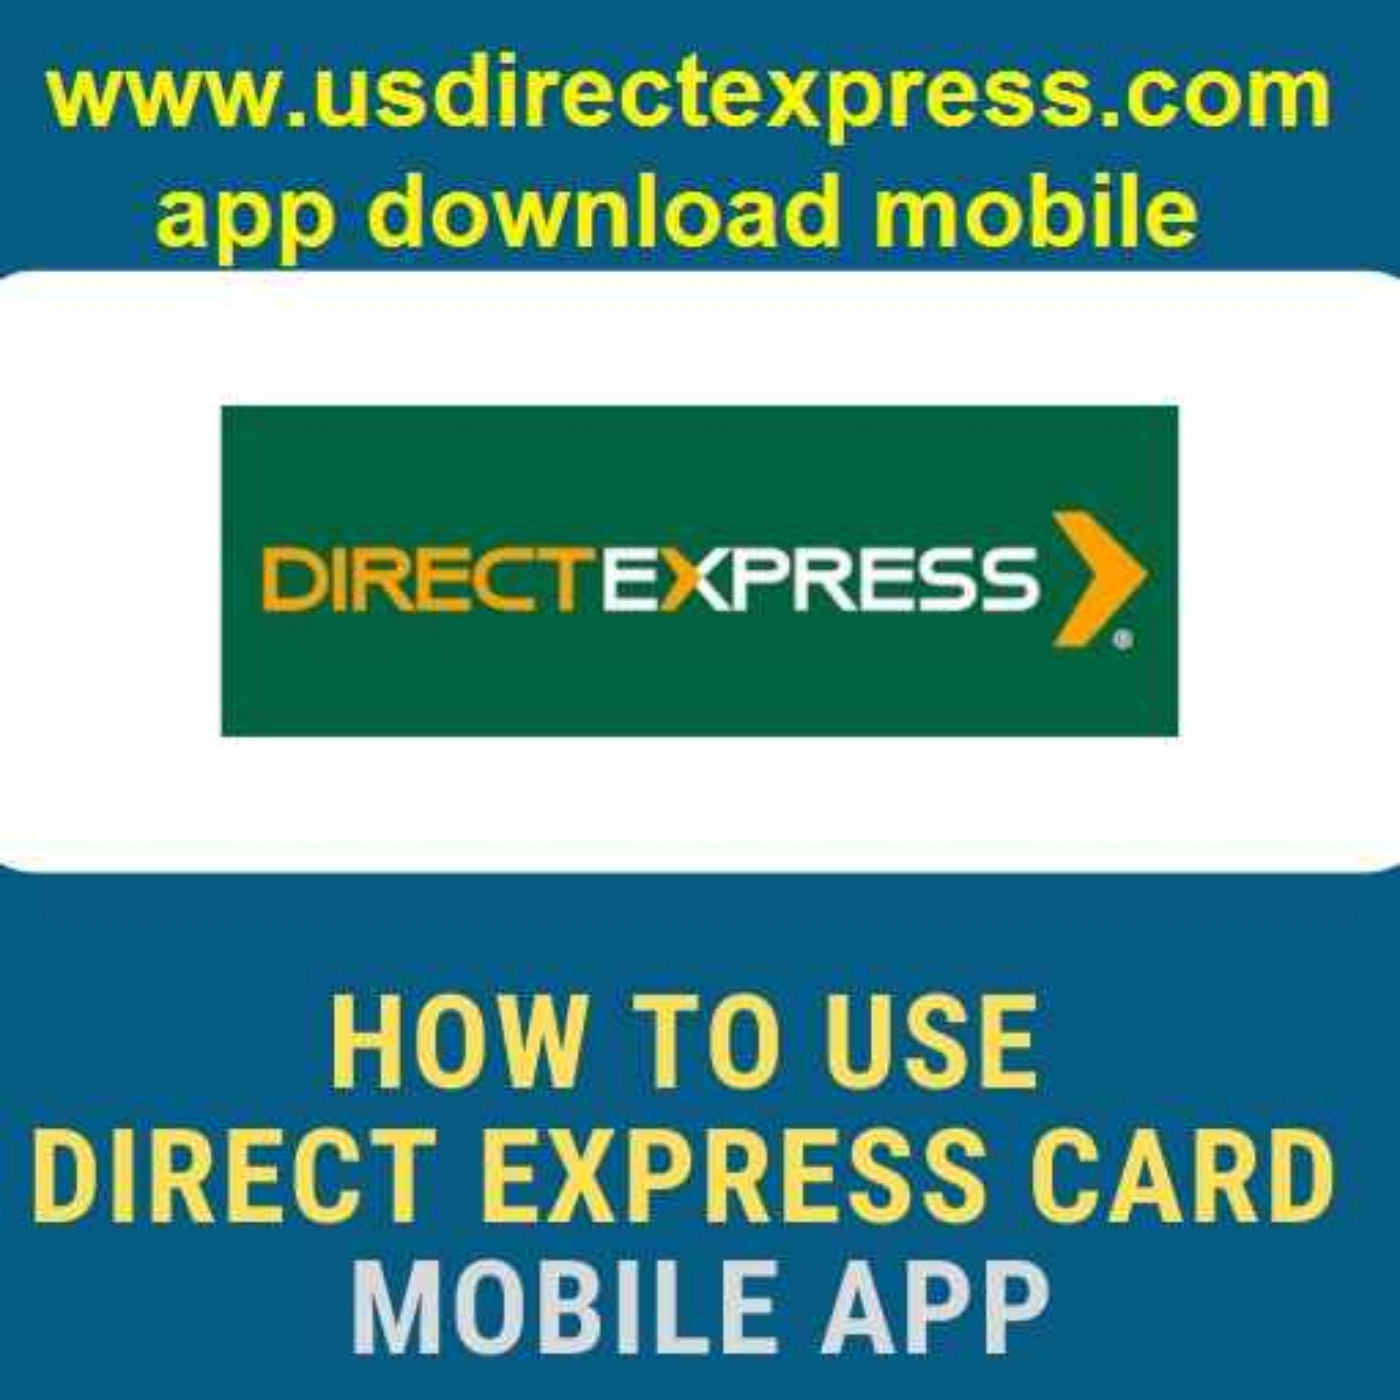 Direct Express mobile app 5332 download  app  download mobile free Android & iOS on Acast